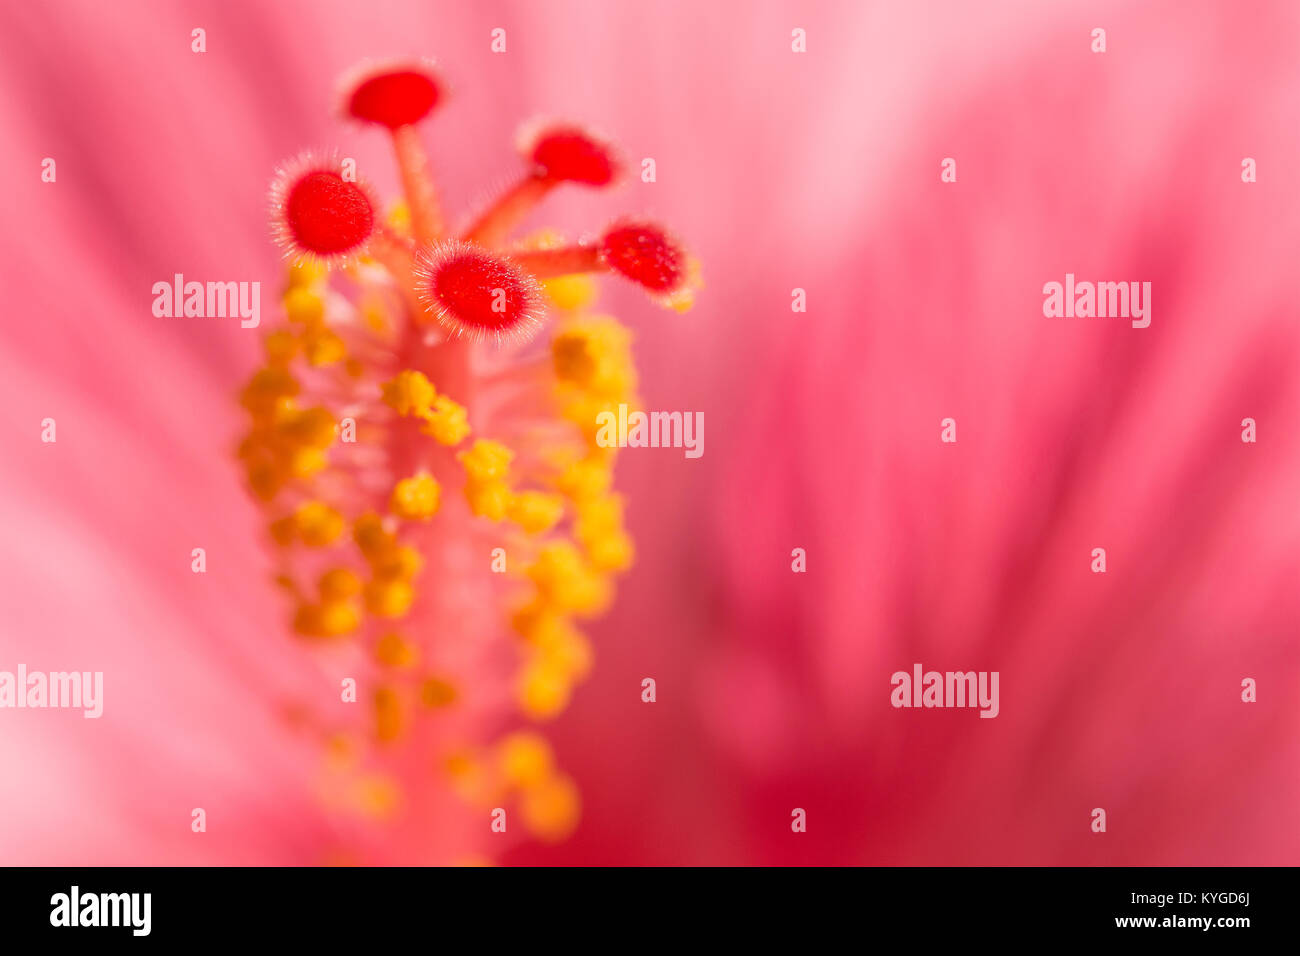 Floral blurred background with pink exotic tropical Hibiskus flower. Macro stock photo with selective focus point and shallow depth of field. Stock Photo